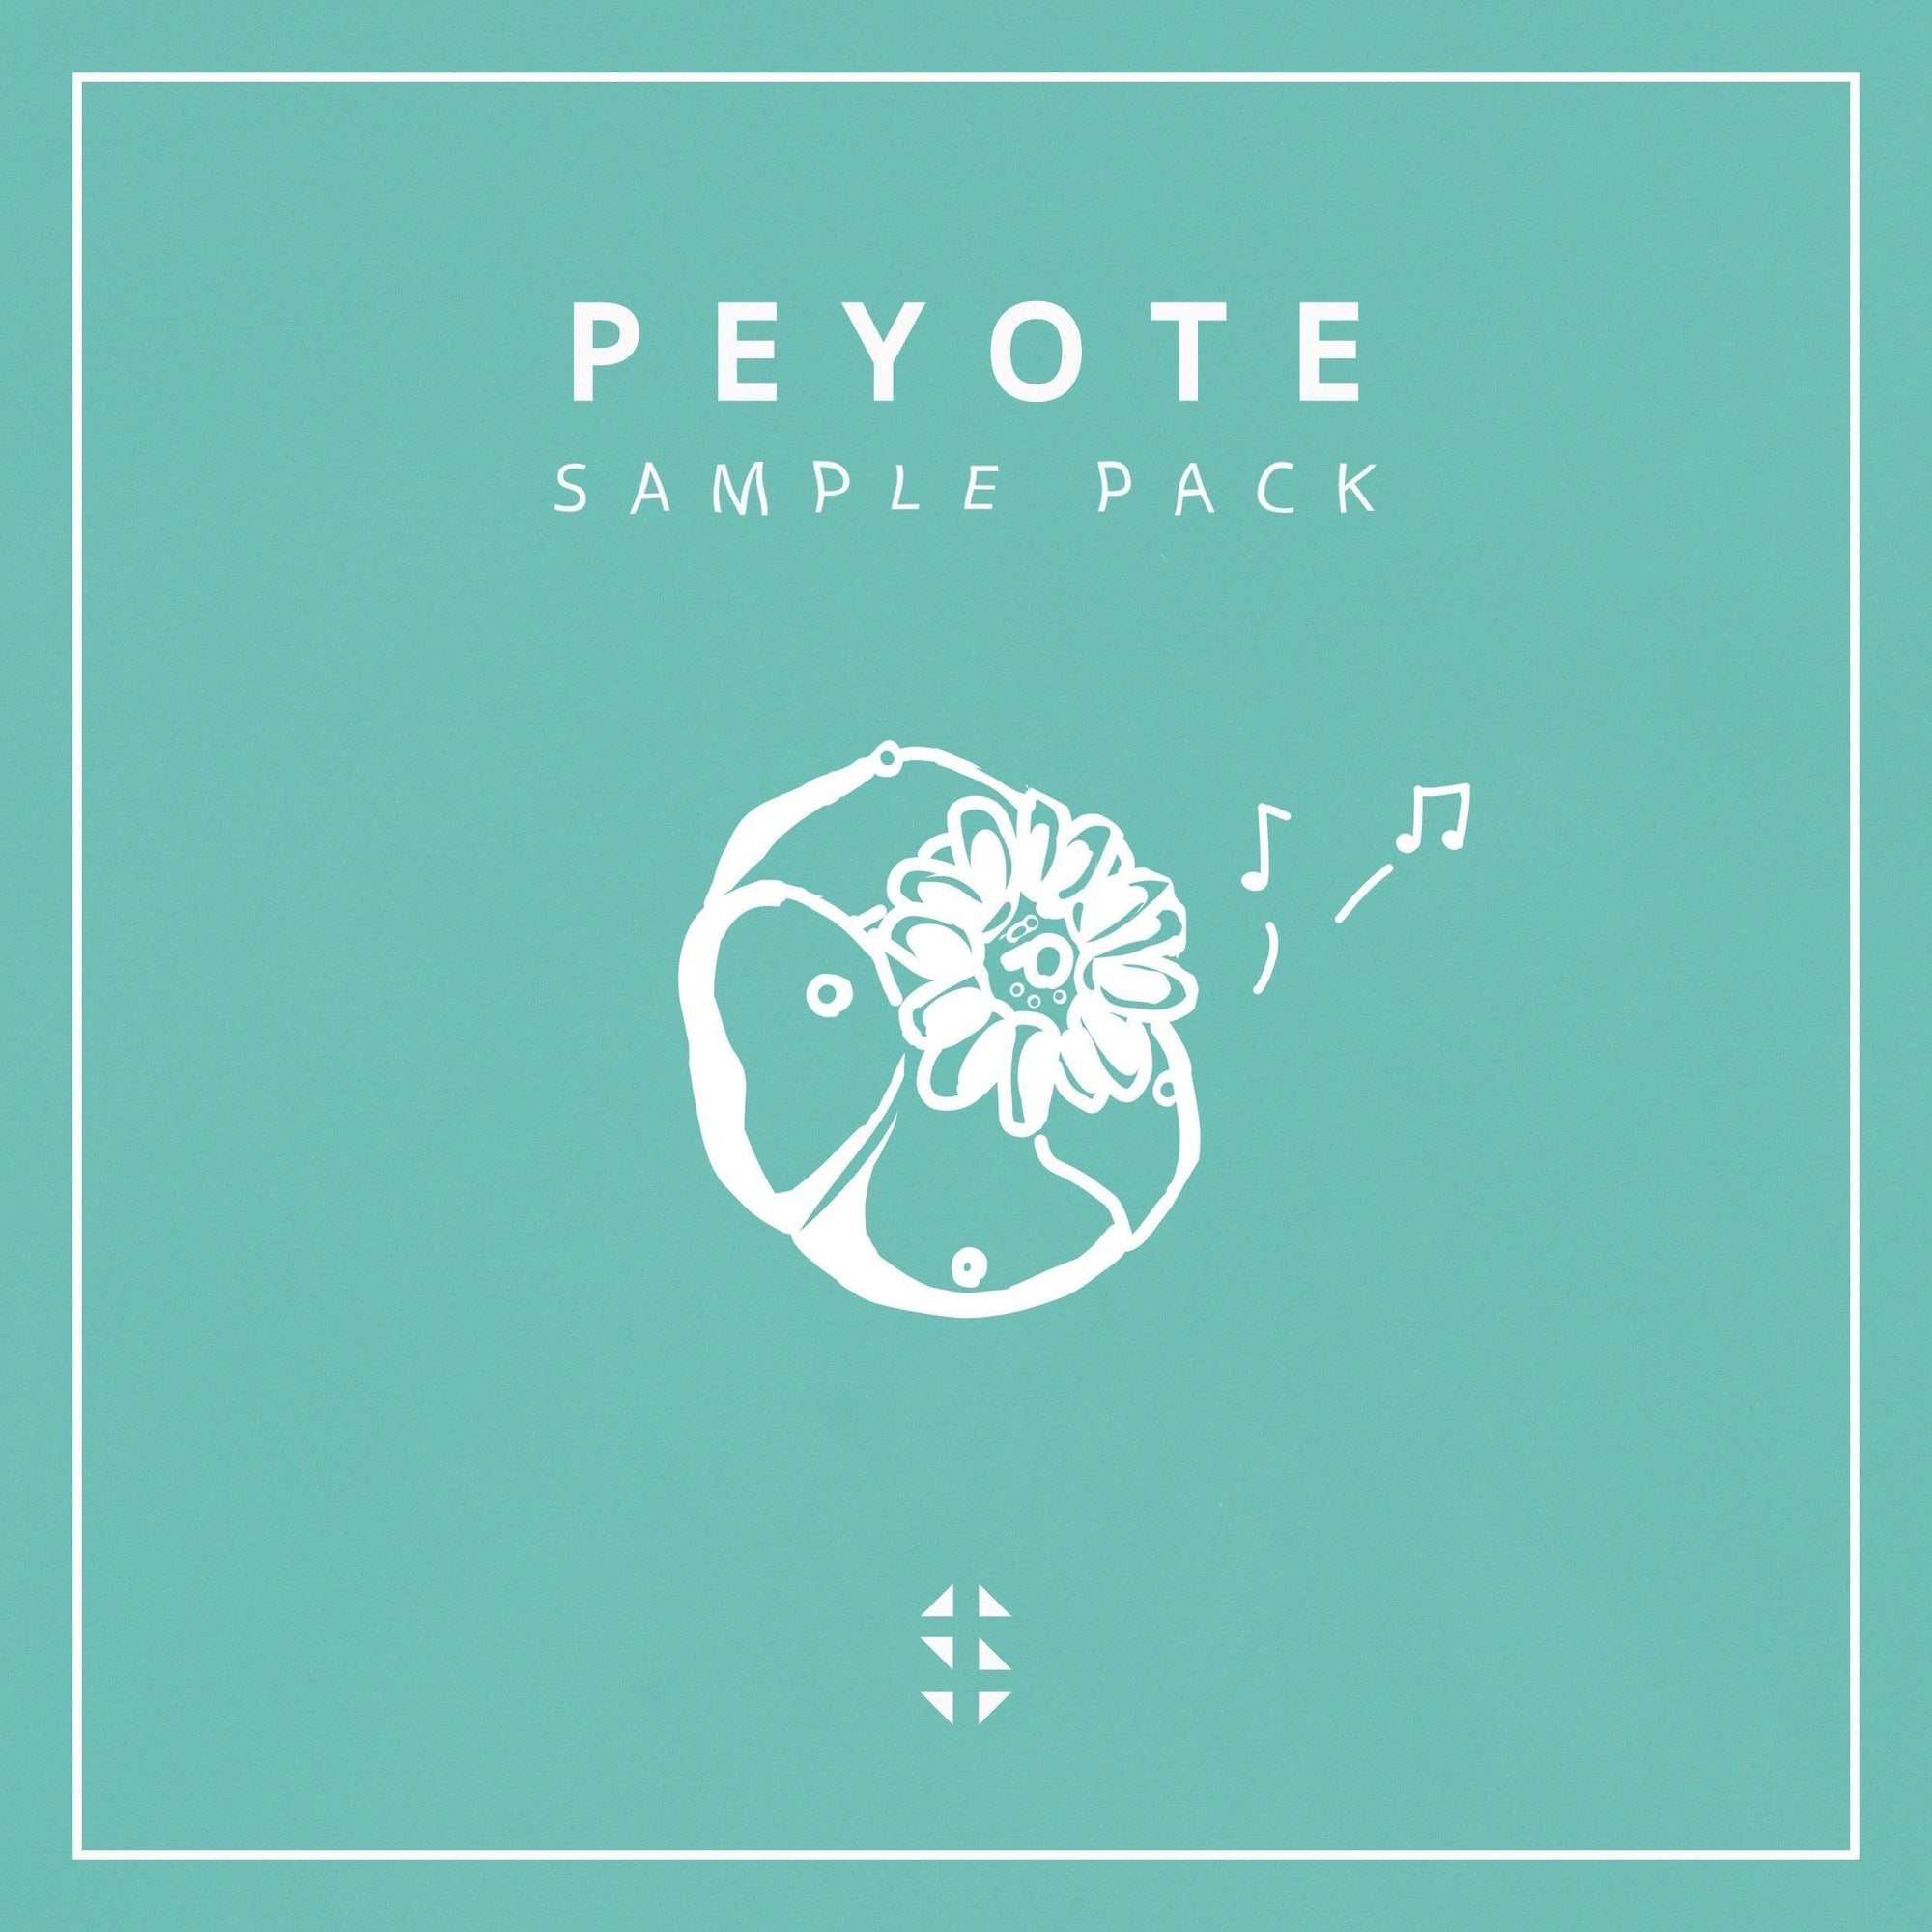 Ambient Sounds Sample Pack and Presets - Peyote Sample Pack Samplified 